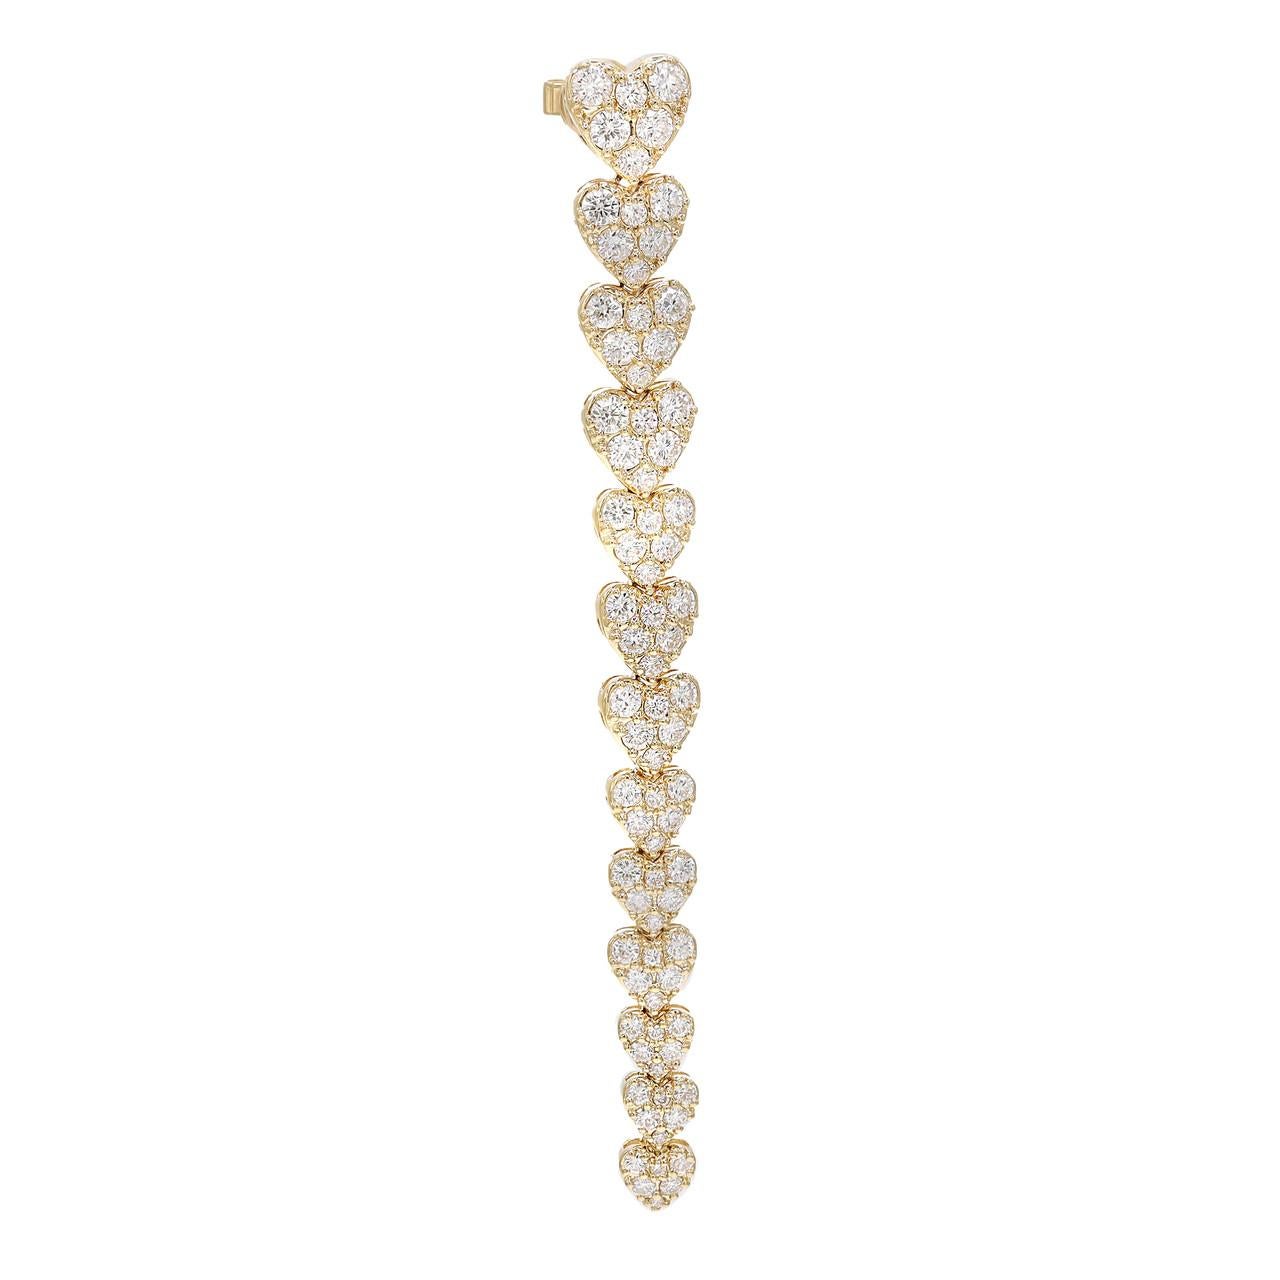 Add a touch of glamour to your style with the exquisite Elizabeth Fine Jewelry 4.11 Carat Diamond Heart Drop Earrings. These earrings, crafted in 18K Yellow Gold, boast a captivating design inspired by leaves and love. The heart-shaped drops are